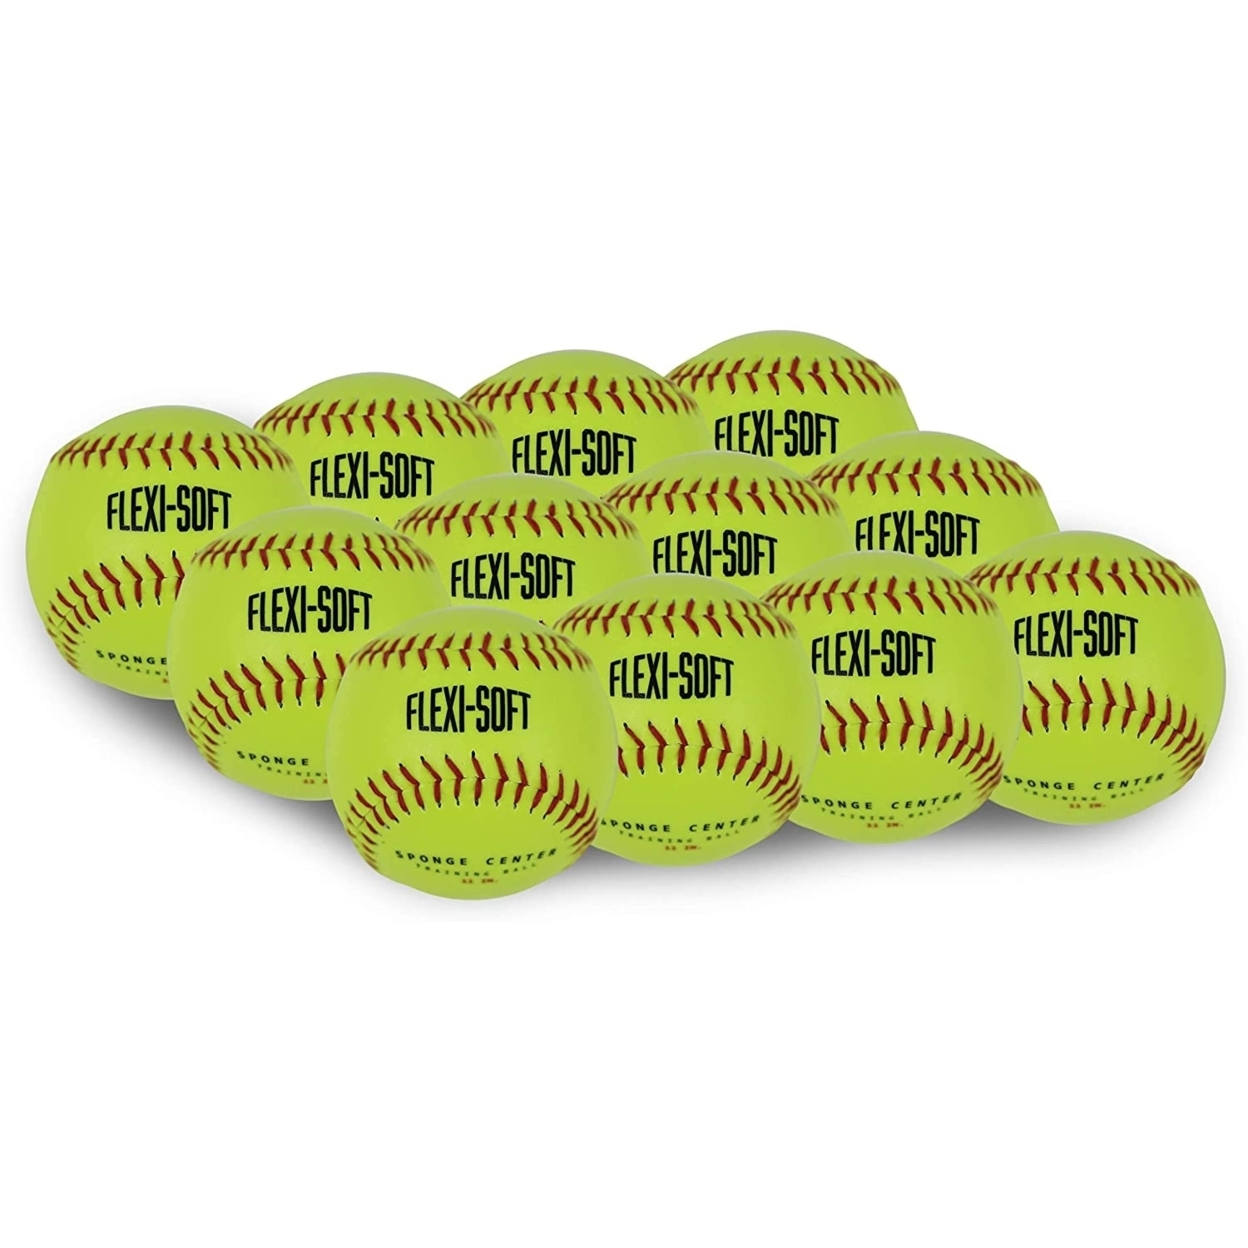 PowerNet Flexi Soft 11 Softball 12-Pack Great For Training (TBALL) (1141-1)